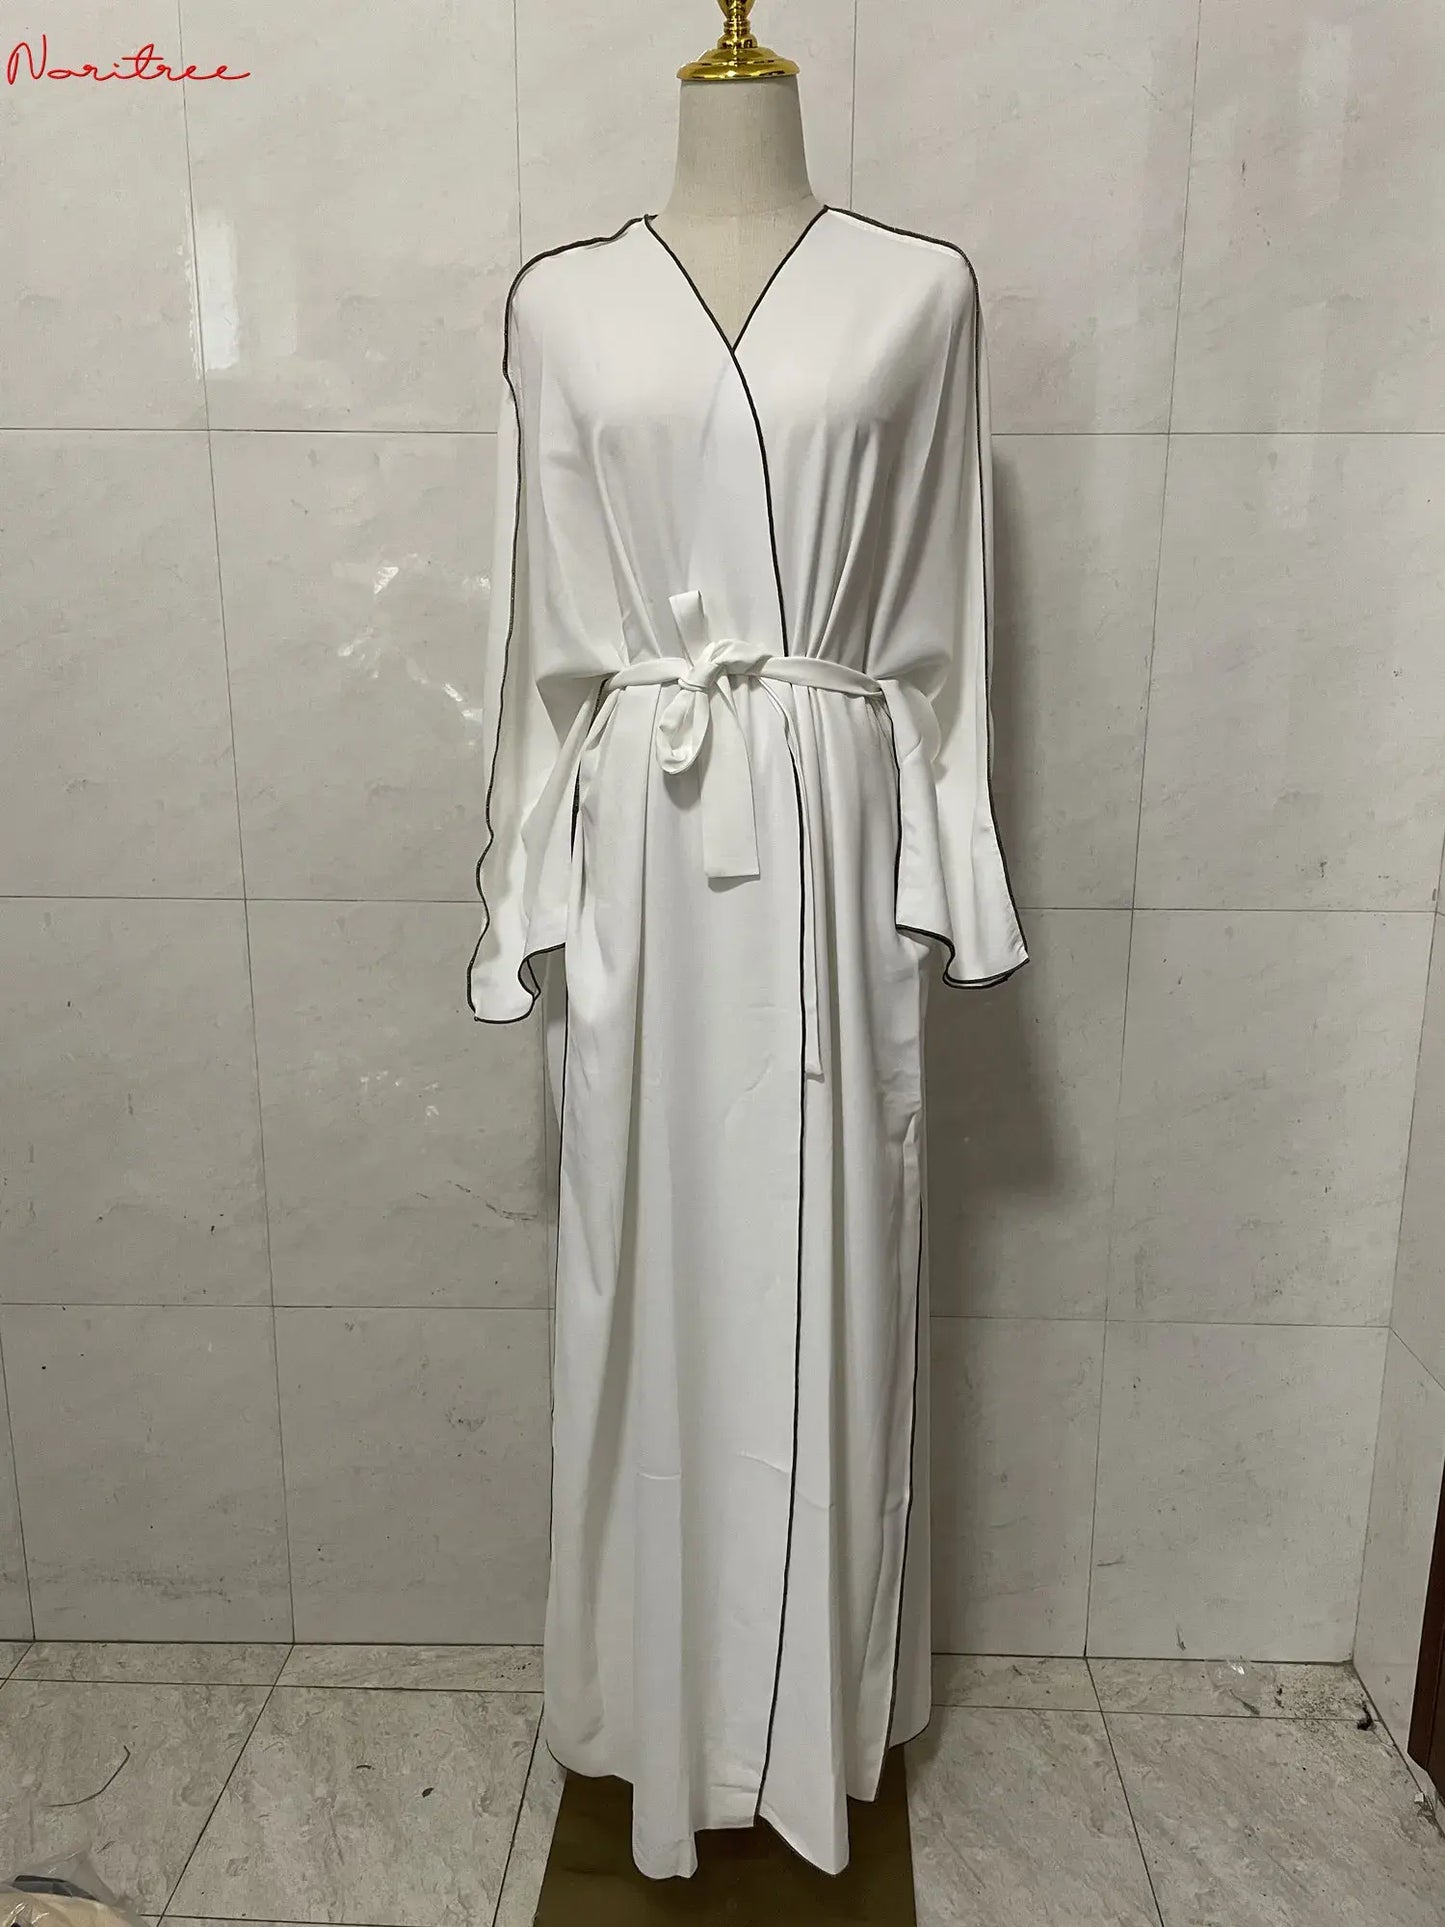 Embrace Elegance with Our Oversized Belted Abaya